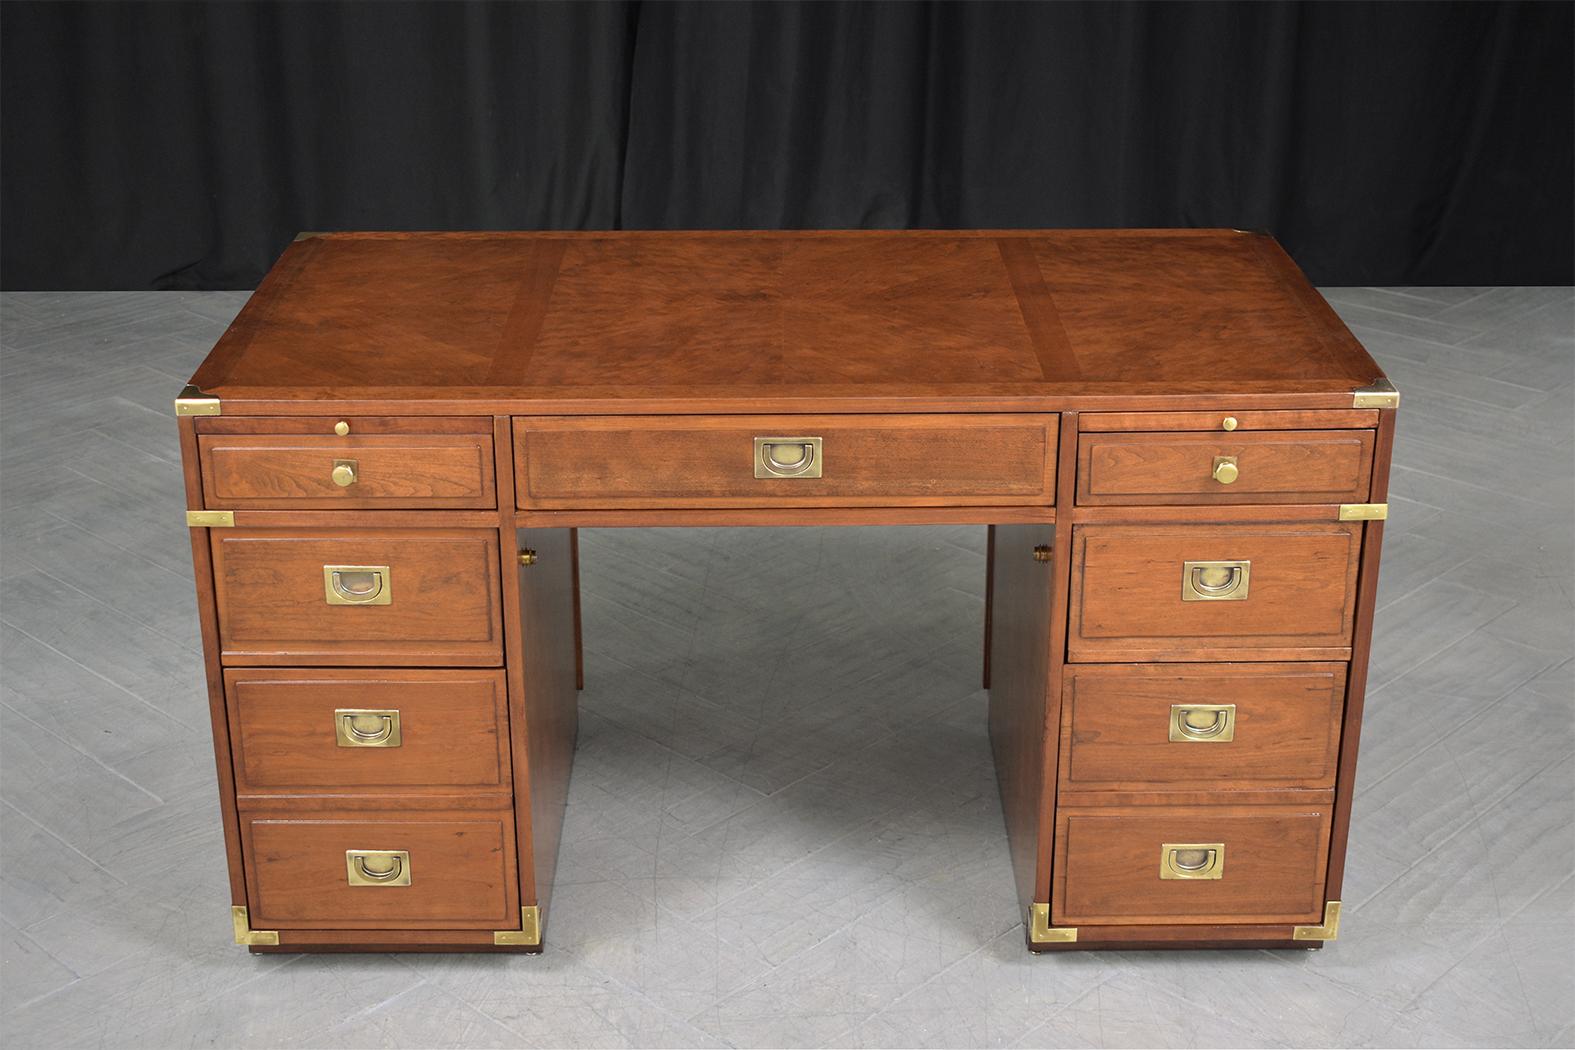 An extraordinary campaign desk executed out of maple and is in great condition has been stripped and refinished by our professional in-house expert craftsman and is completely restored. This mid-century modern executive desk is eye-catching and